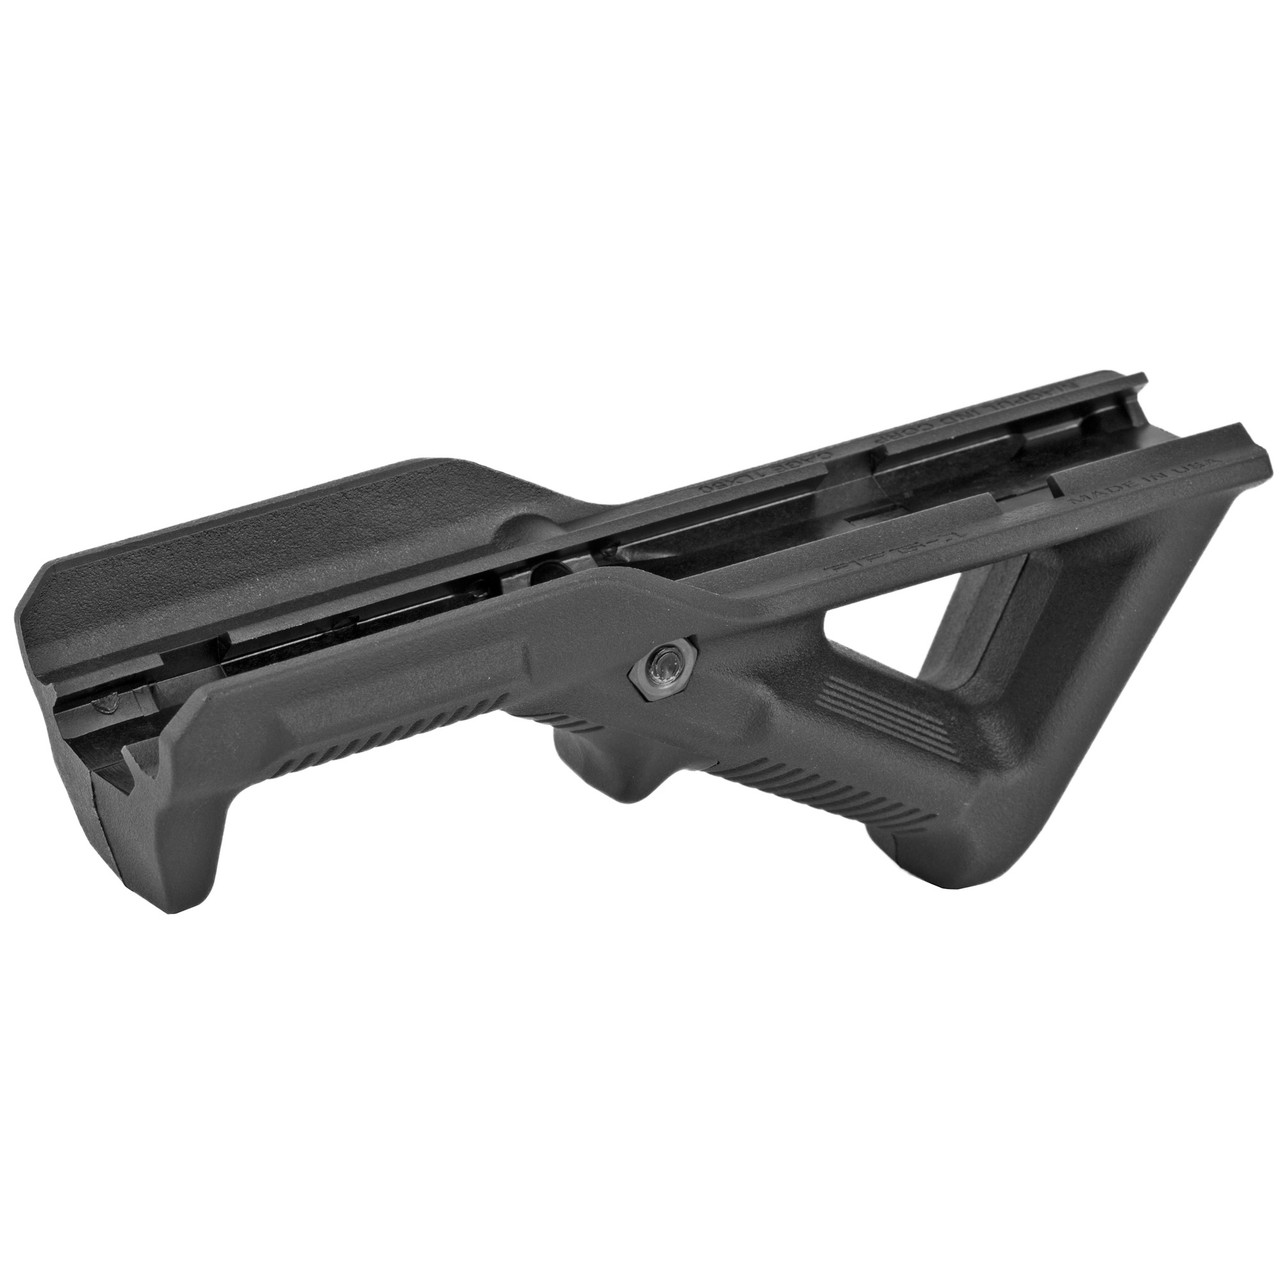 Magpul Industries MAG411-BLK (afg1) Angled Foregrip Blk